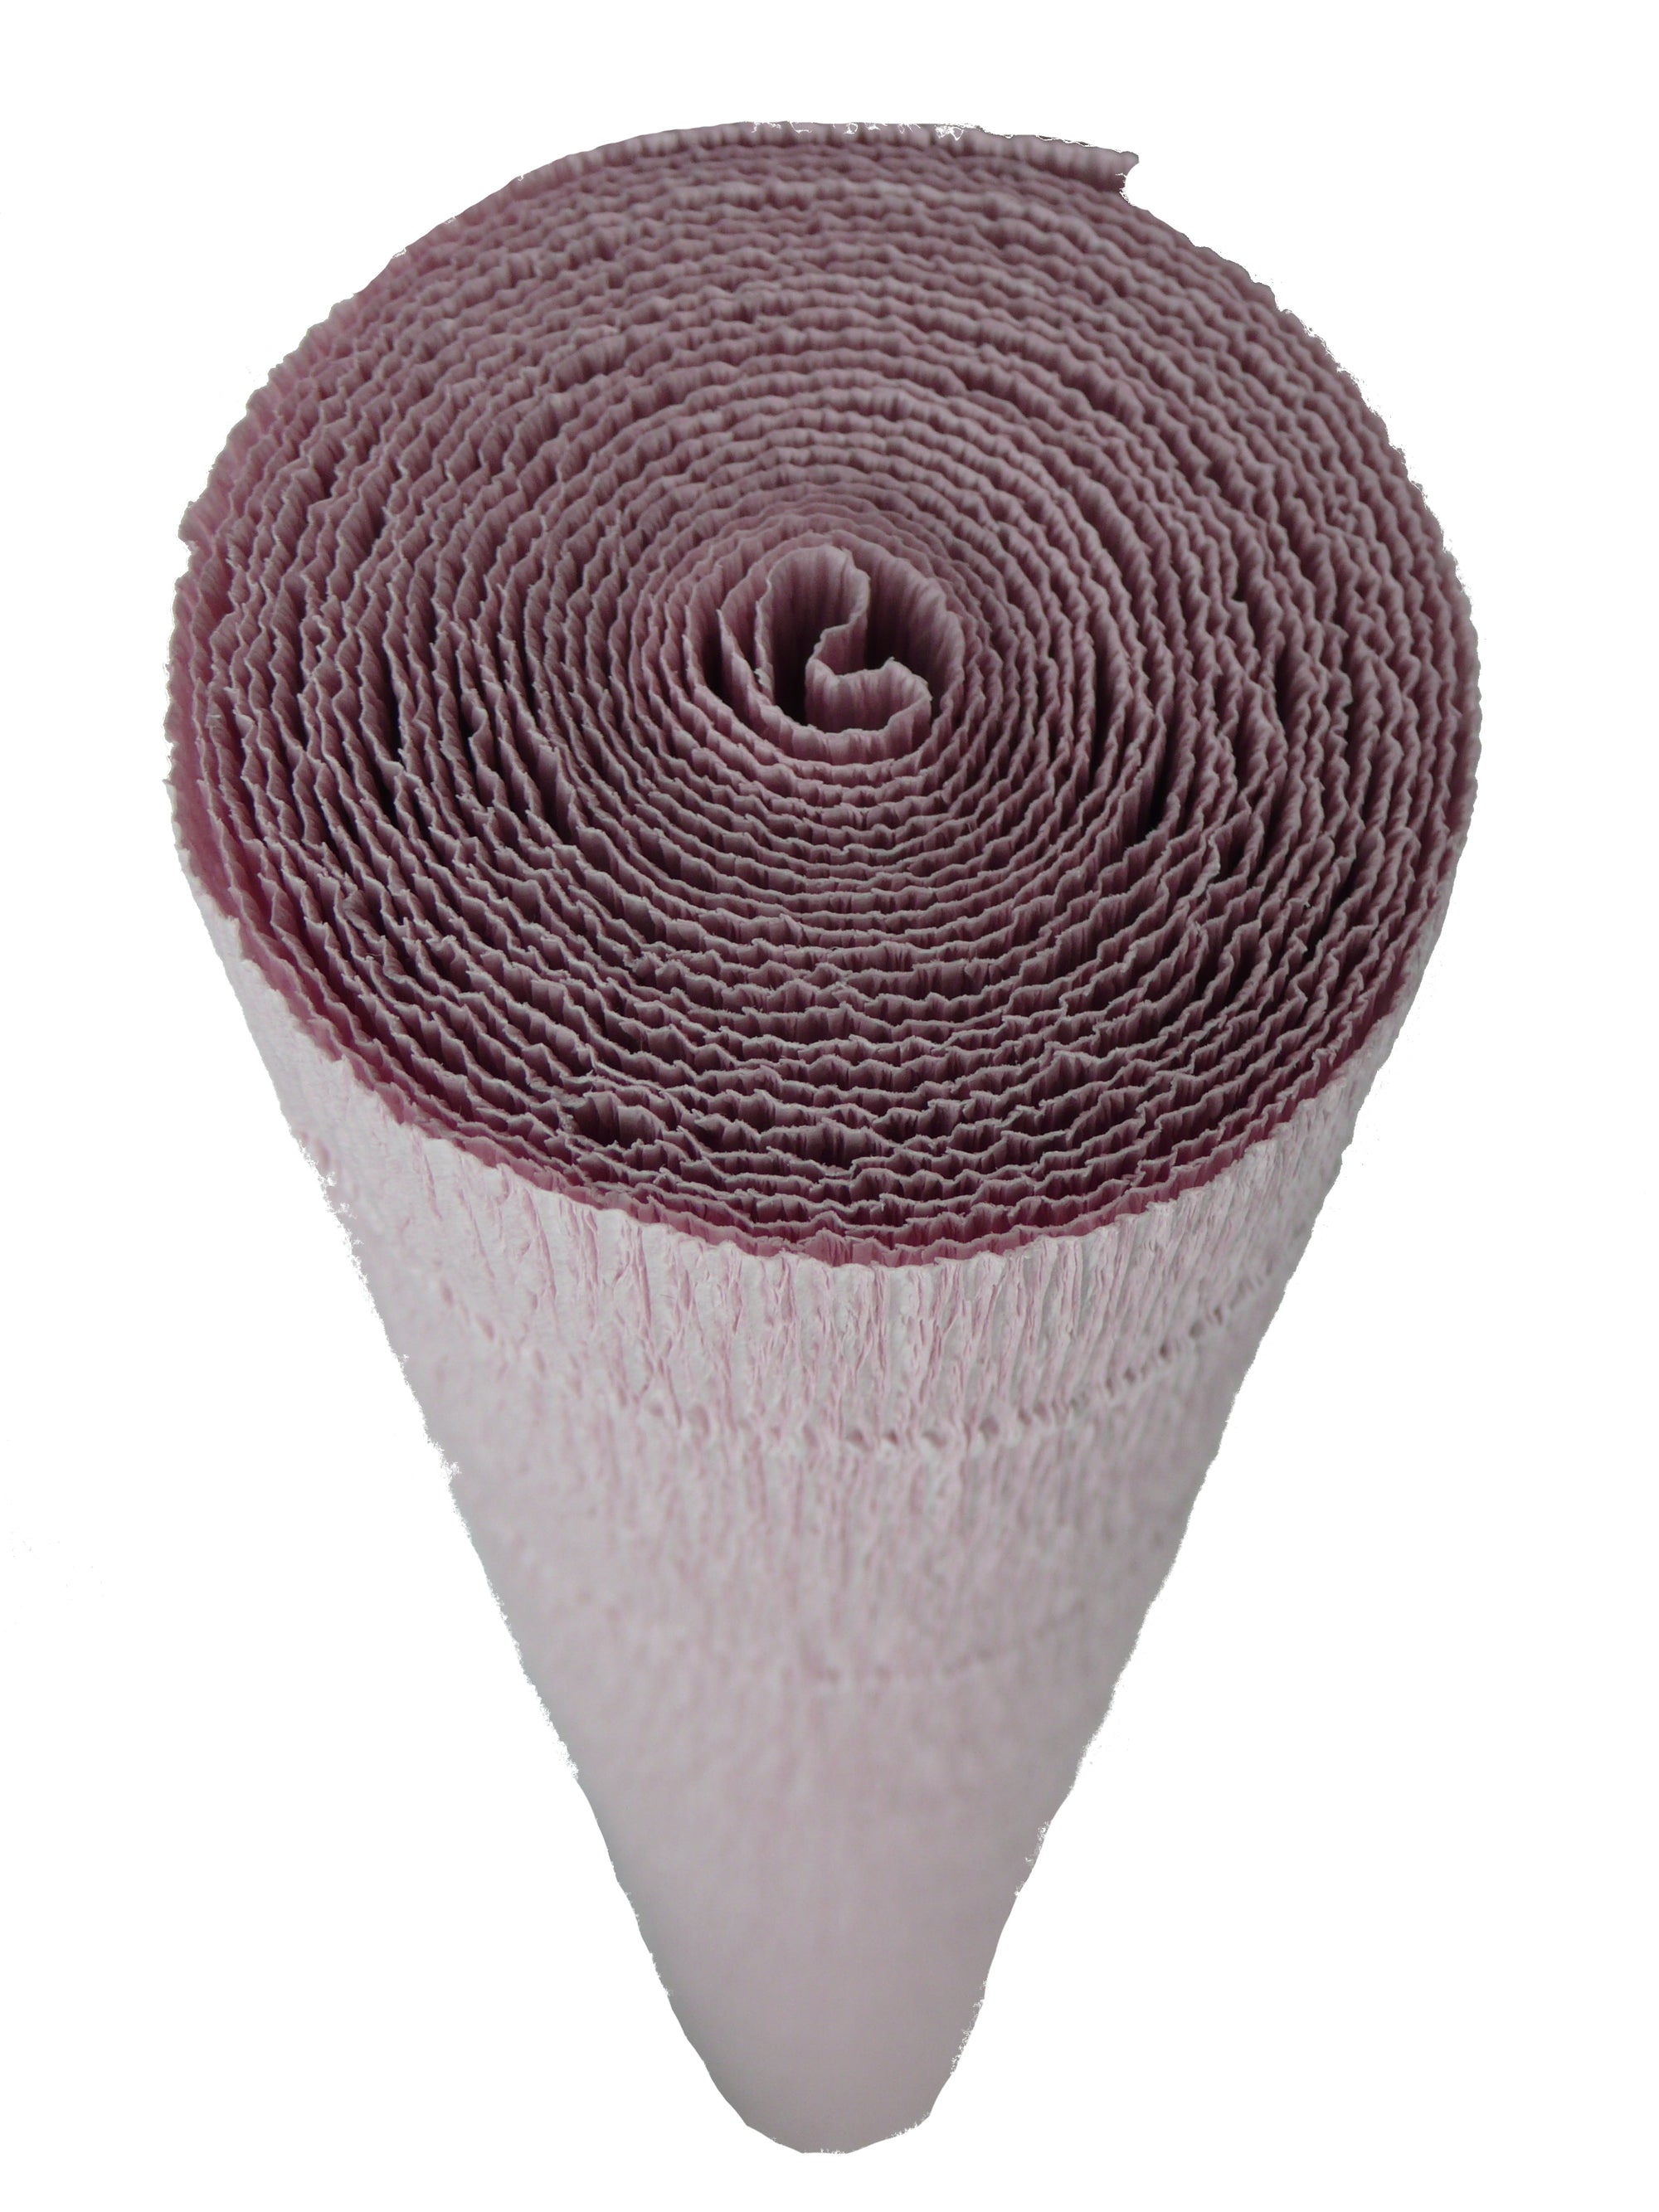 Italian Crepe Paper roll 180 gram - 17A/3 DISTANT DRUMS ROSE BY TIFFANIE TURNER